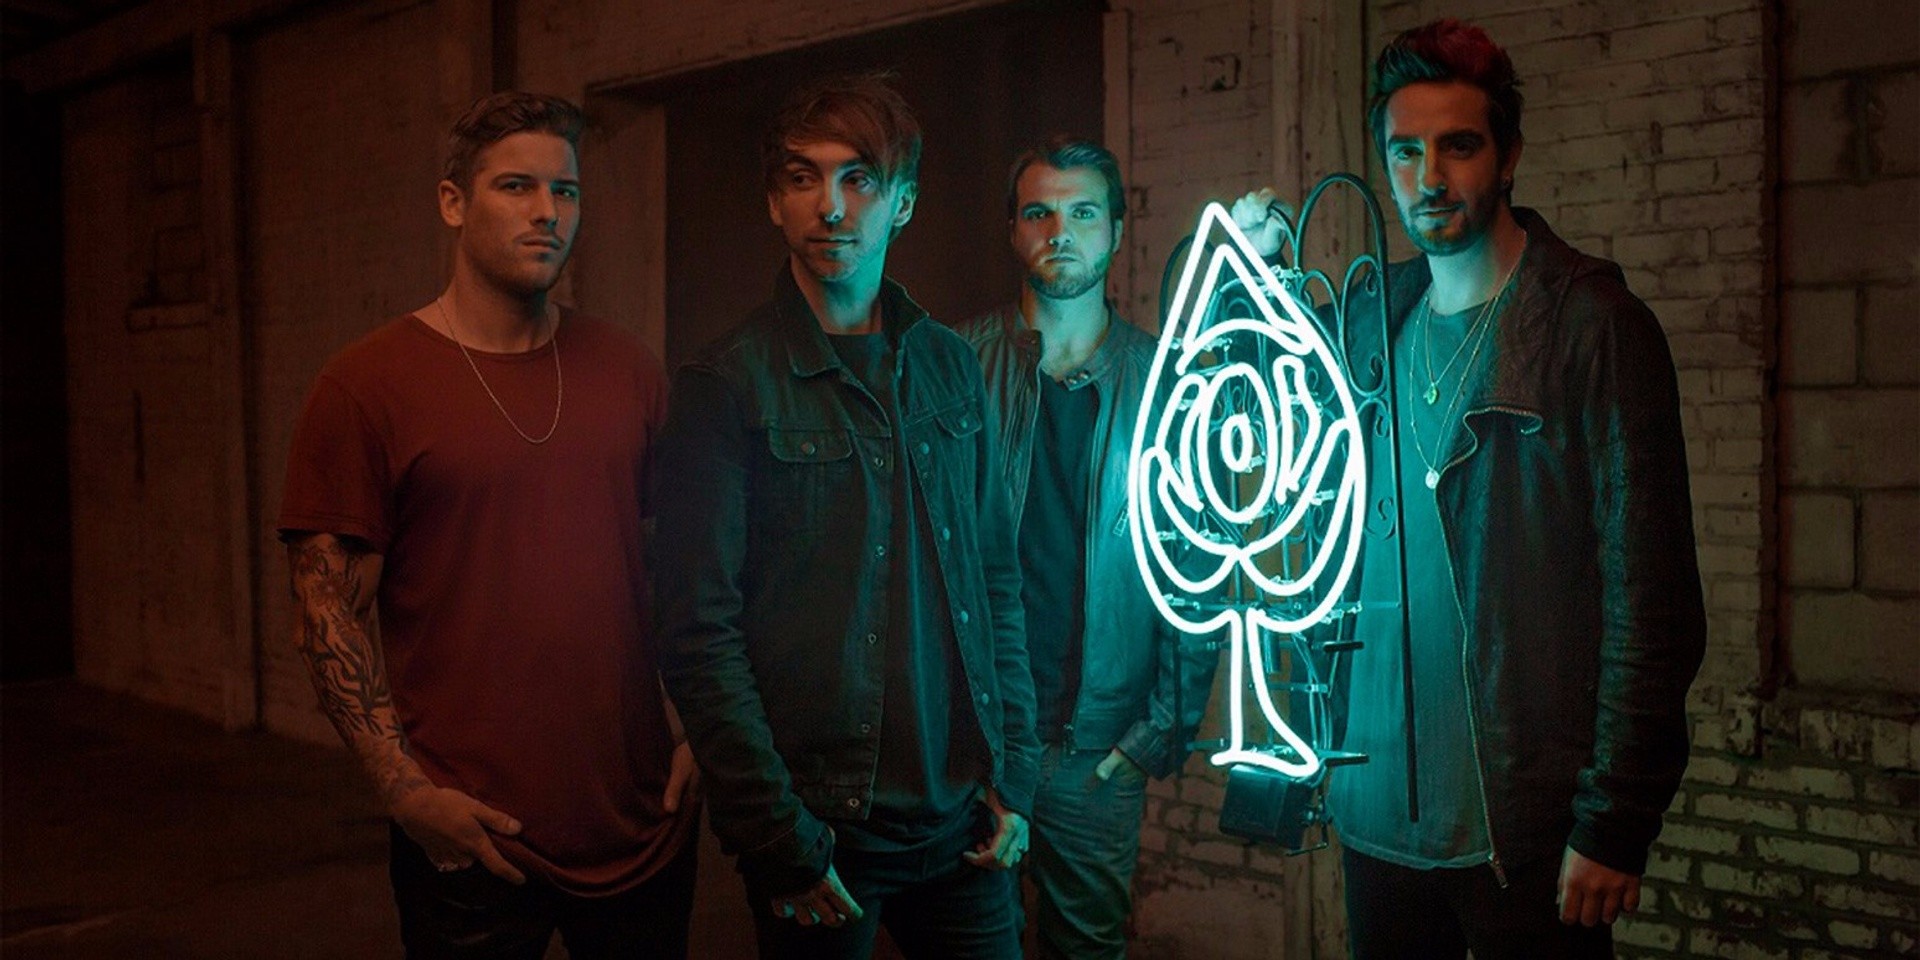 Get a chance to meet-and-greet All Time Low in Manila — contest